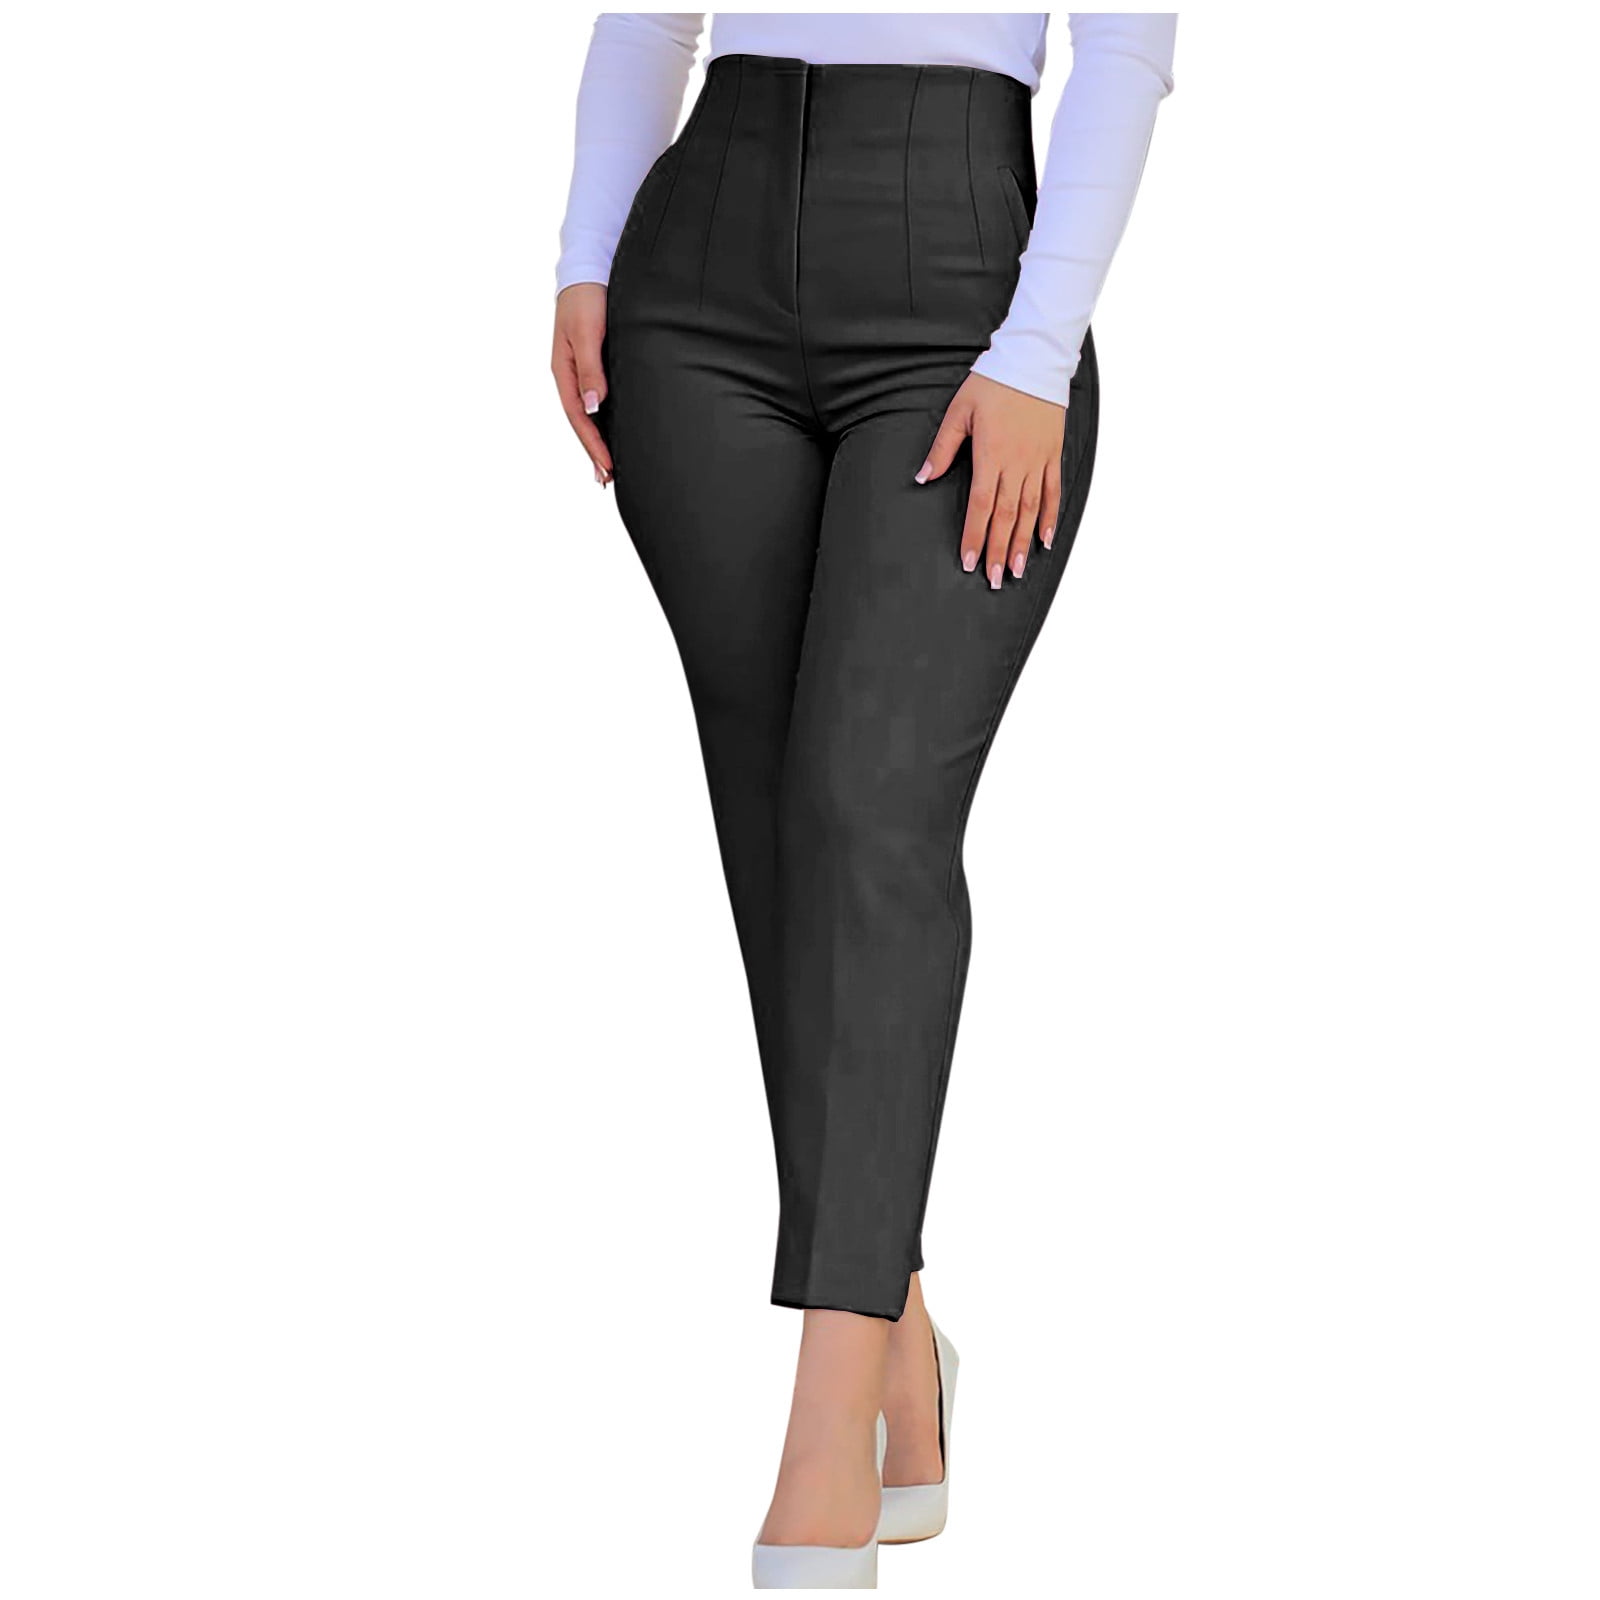 RYRJJ Women's Cropped Dress Pants with Pockets Business Office